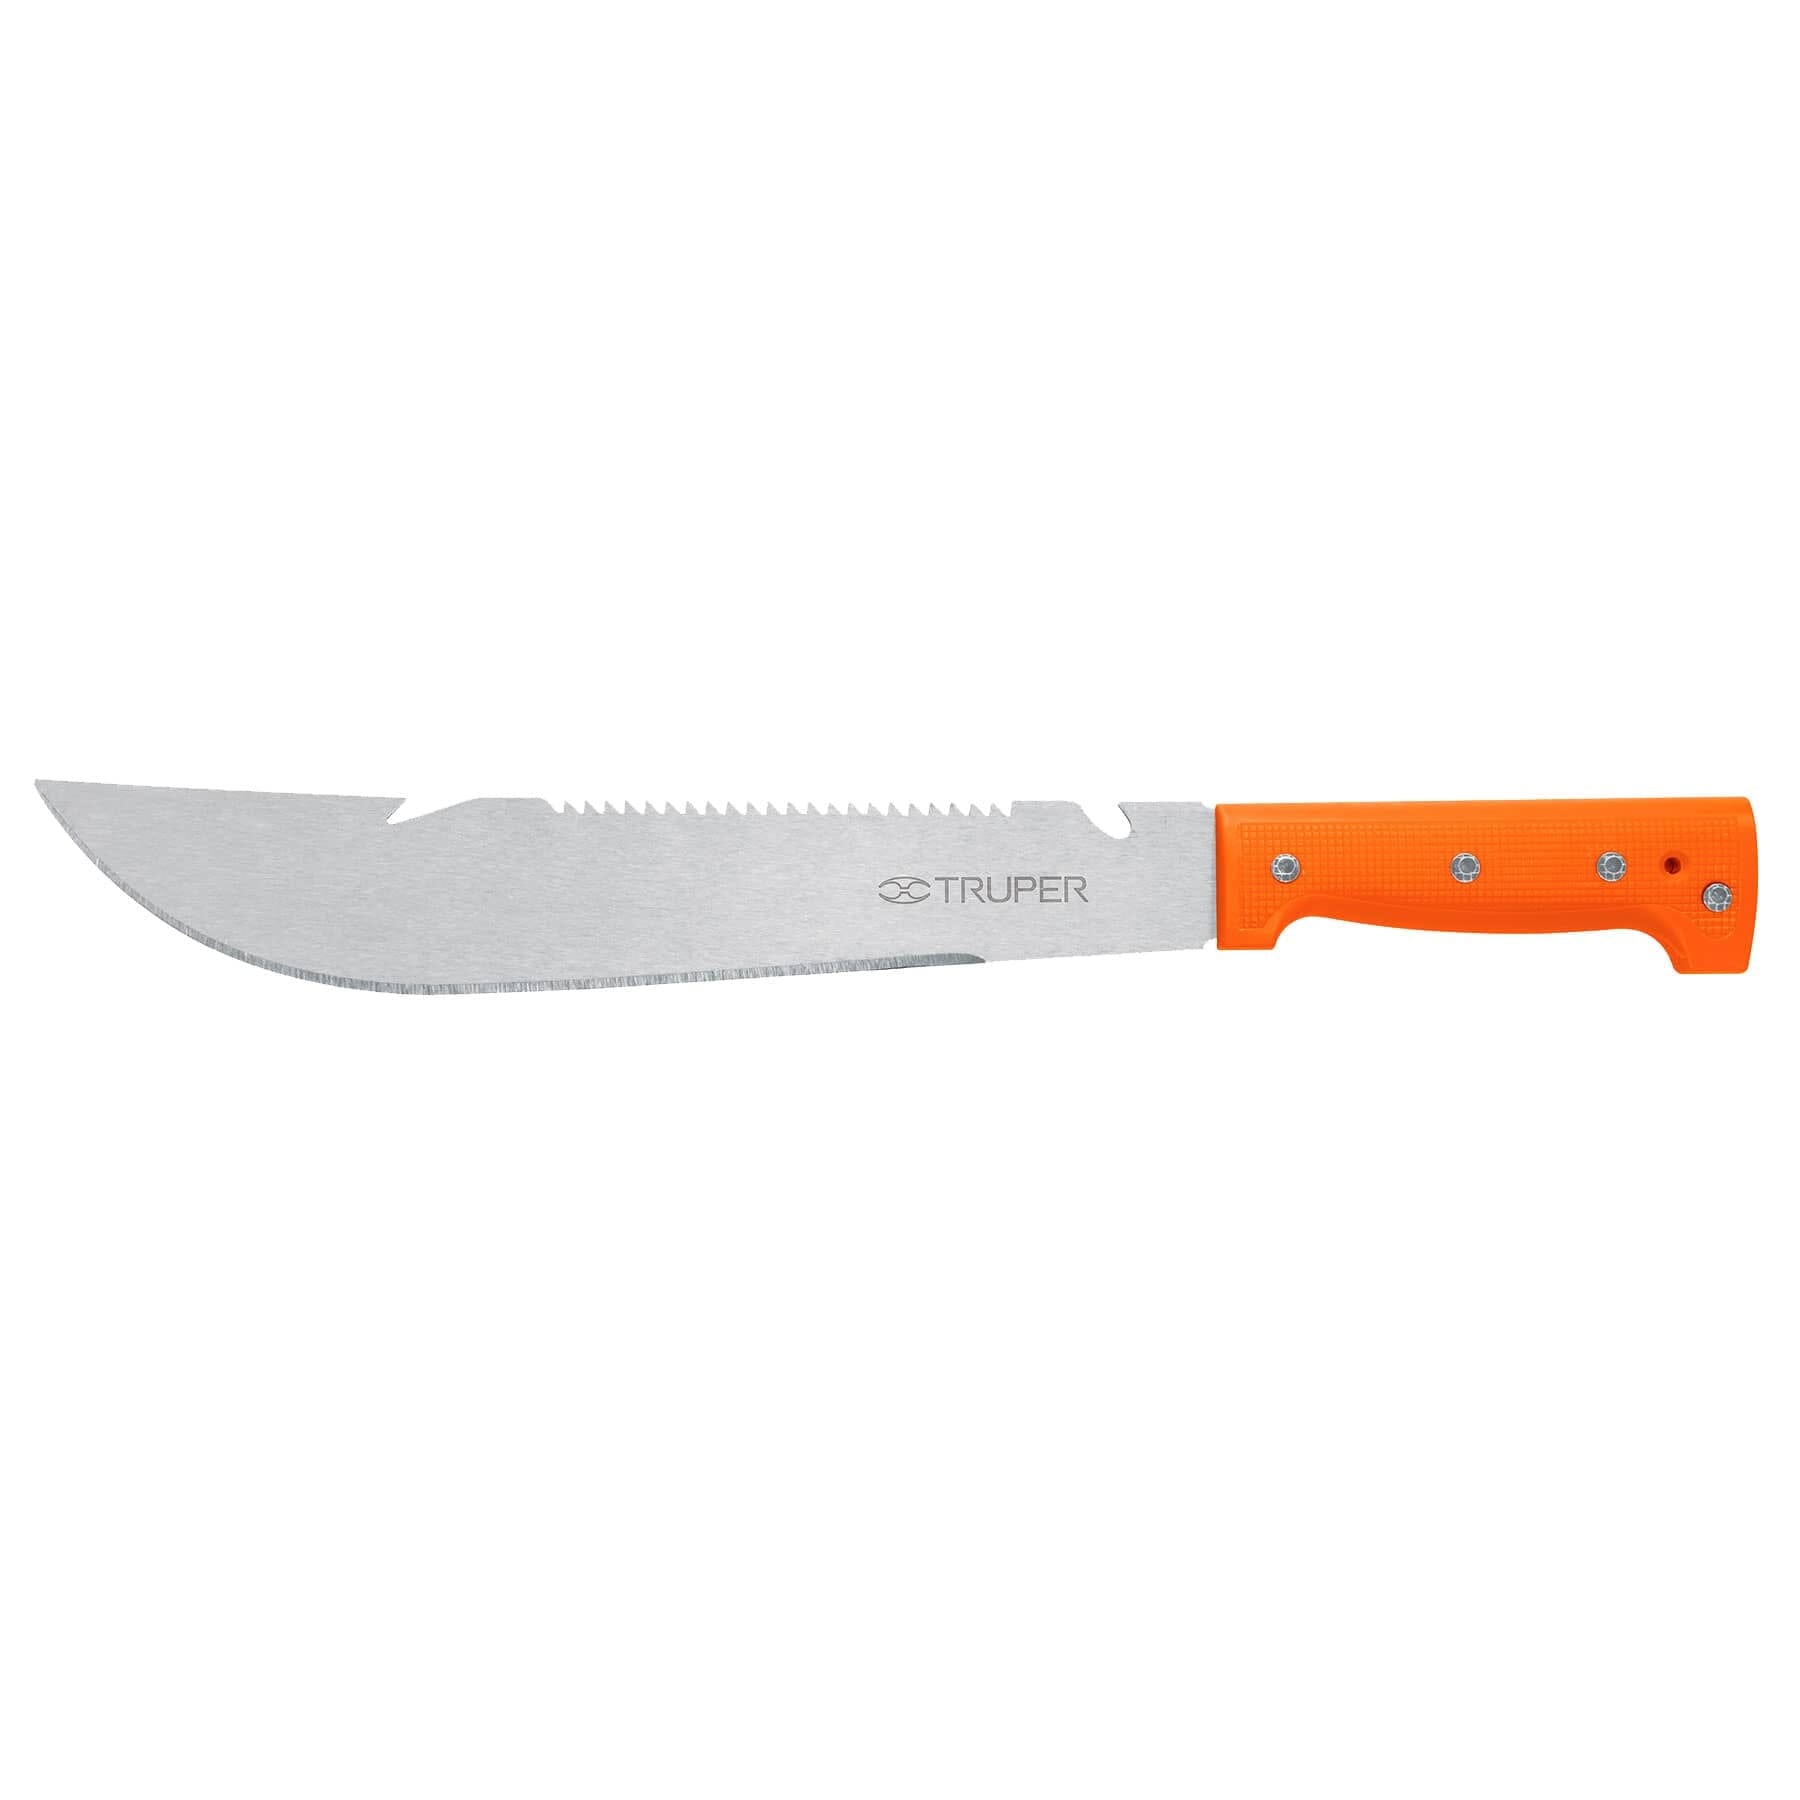 Truper Machette with Rivetted Handle 300mm